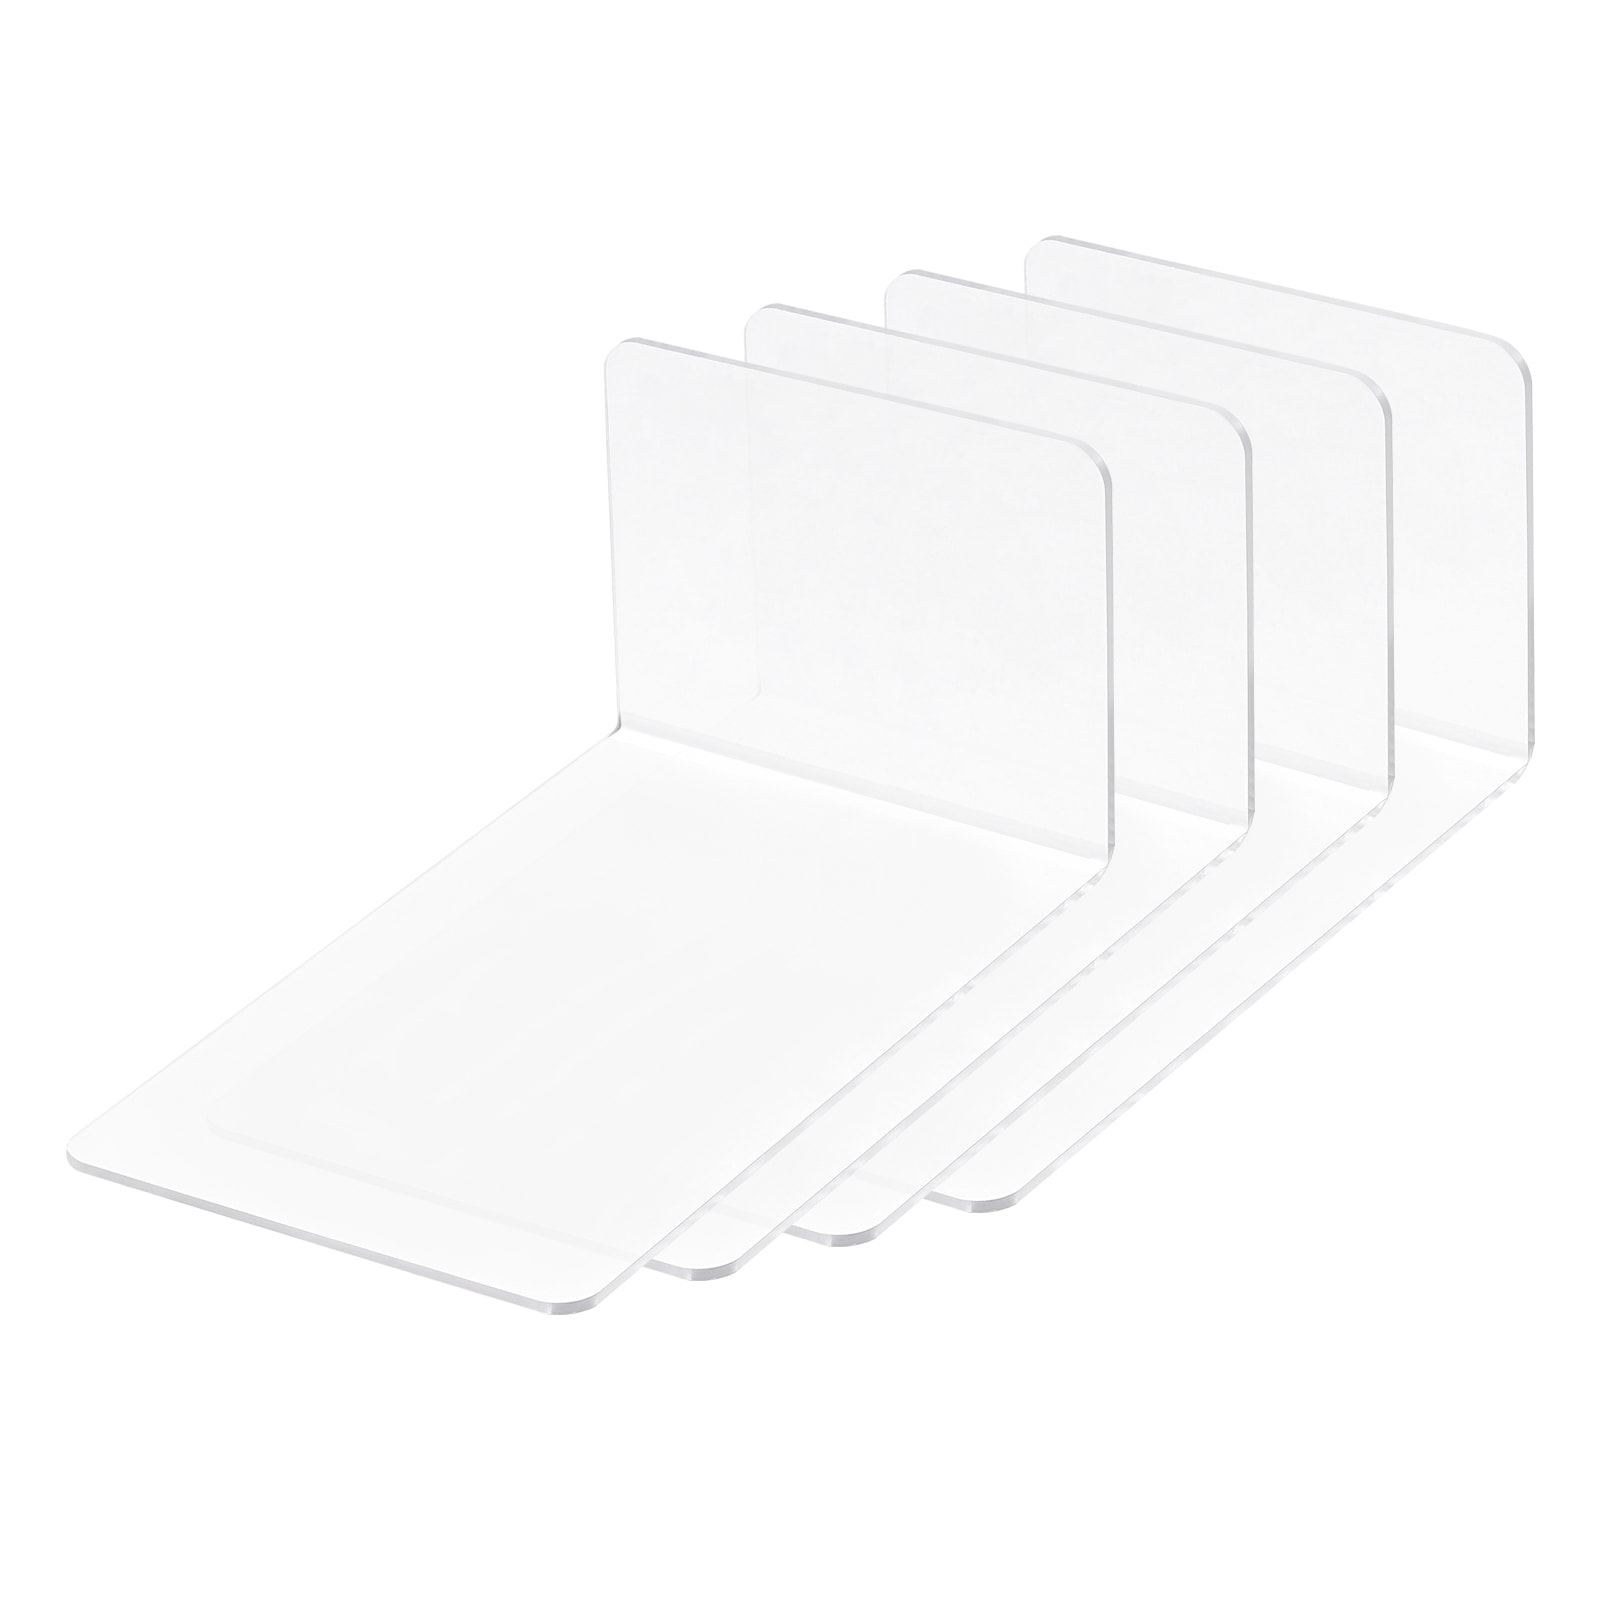 10Pack Clear Acrylic Shelf Dividers, Closet Shelves and Separator